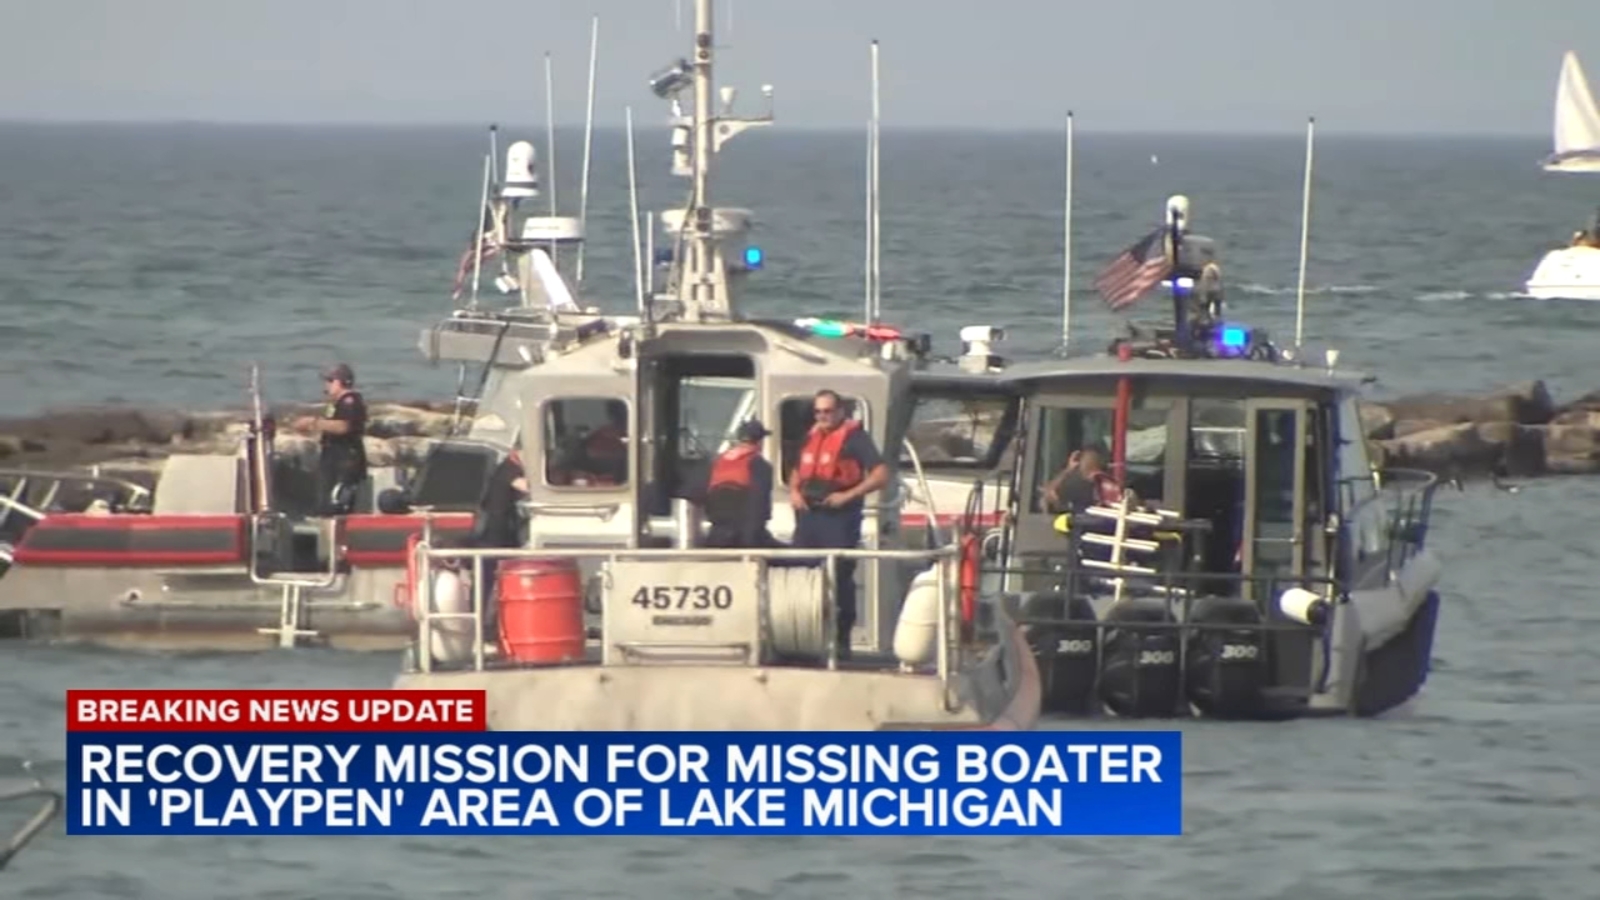 Chicago playpen accident: Crews to resume recovery operation for man who fell off boat in Lake Michigan, fire department says [Video]